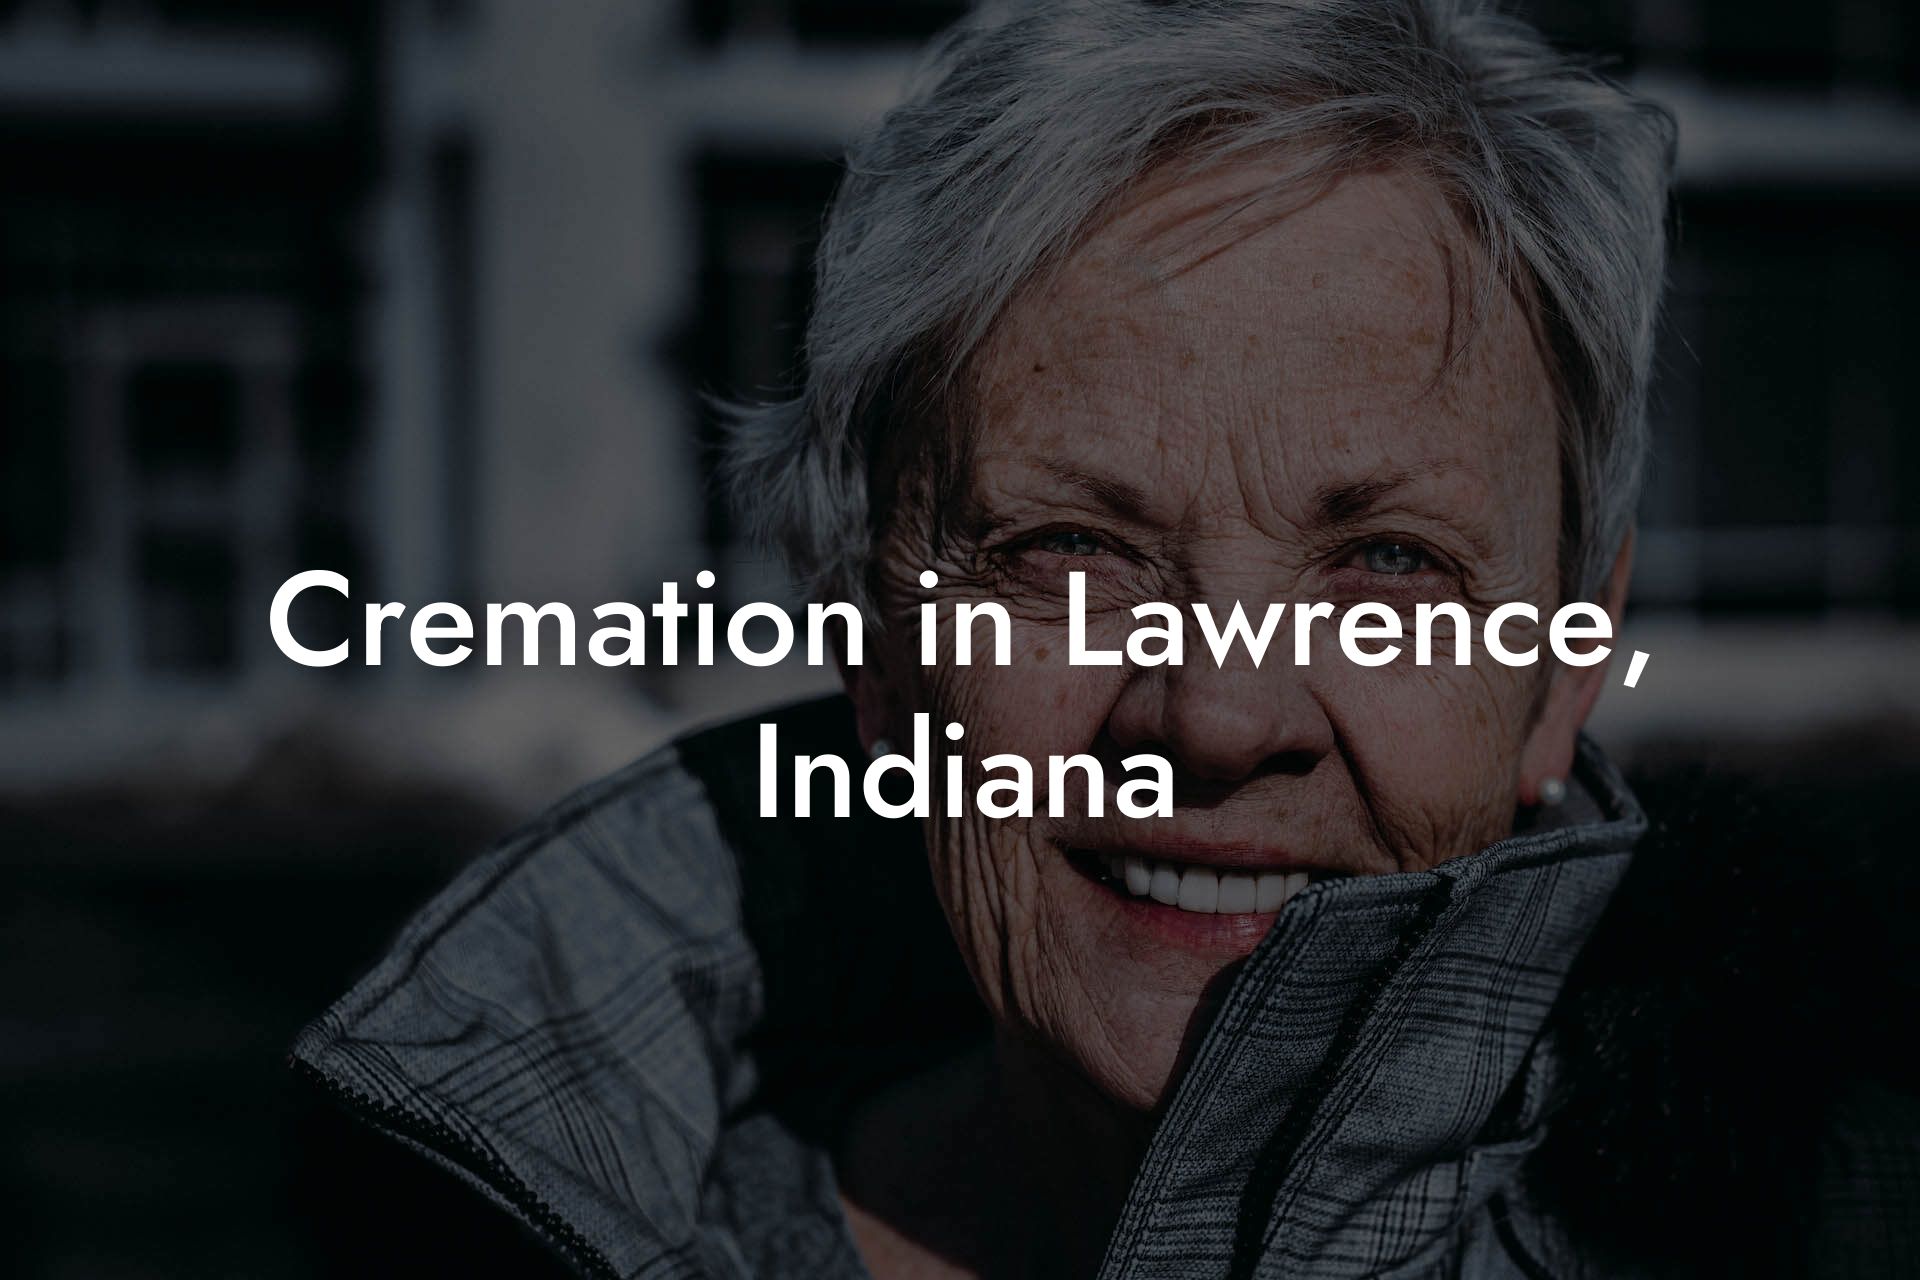 Cremation in Lawrence, Indiana